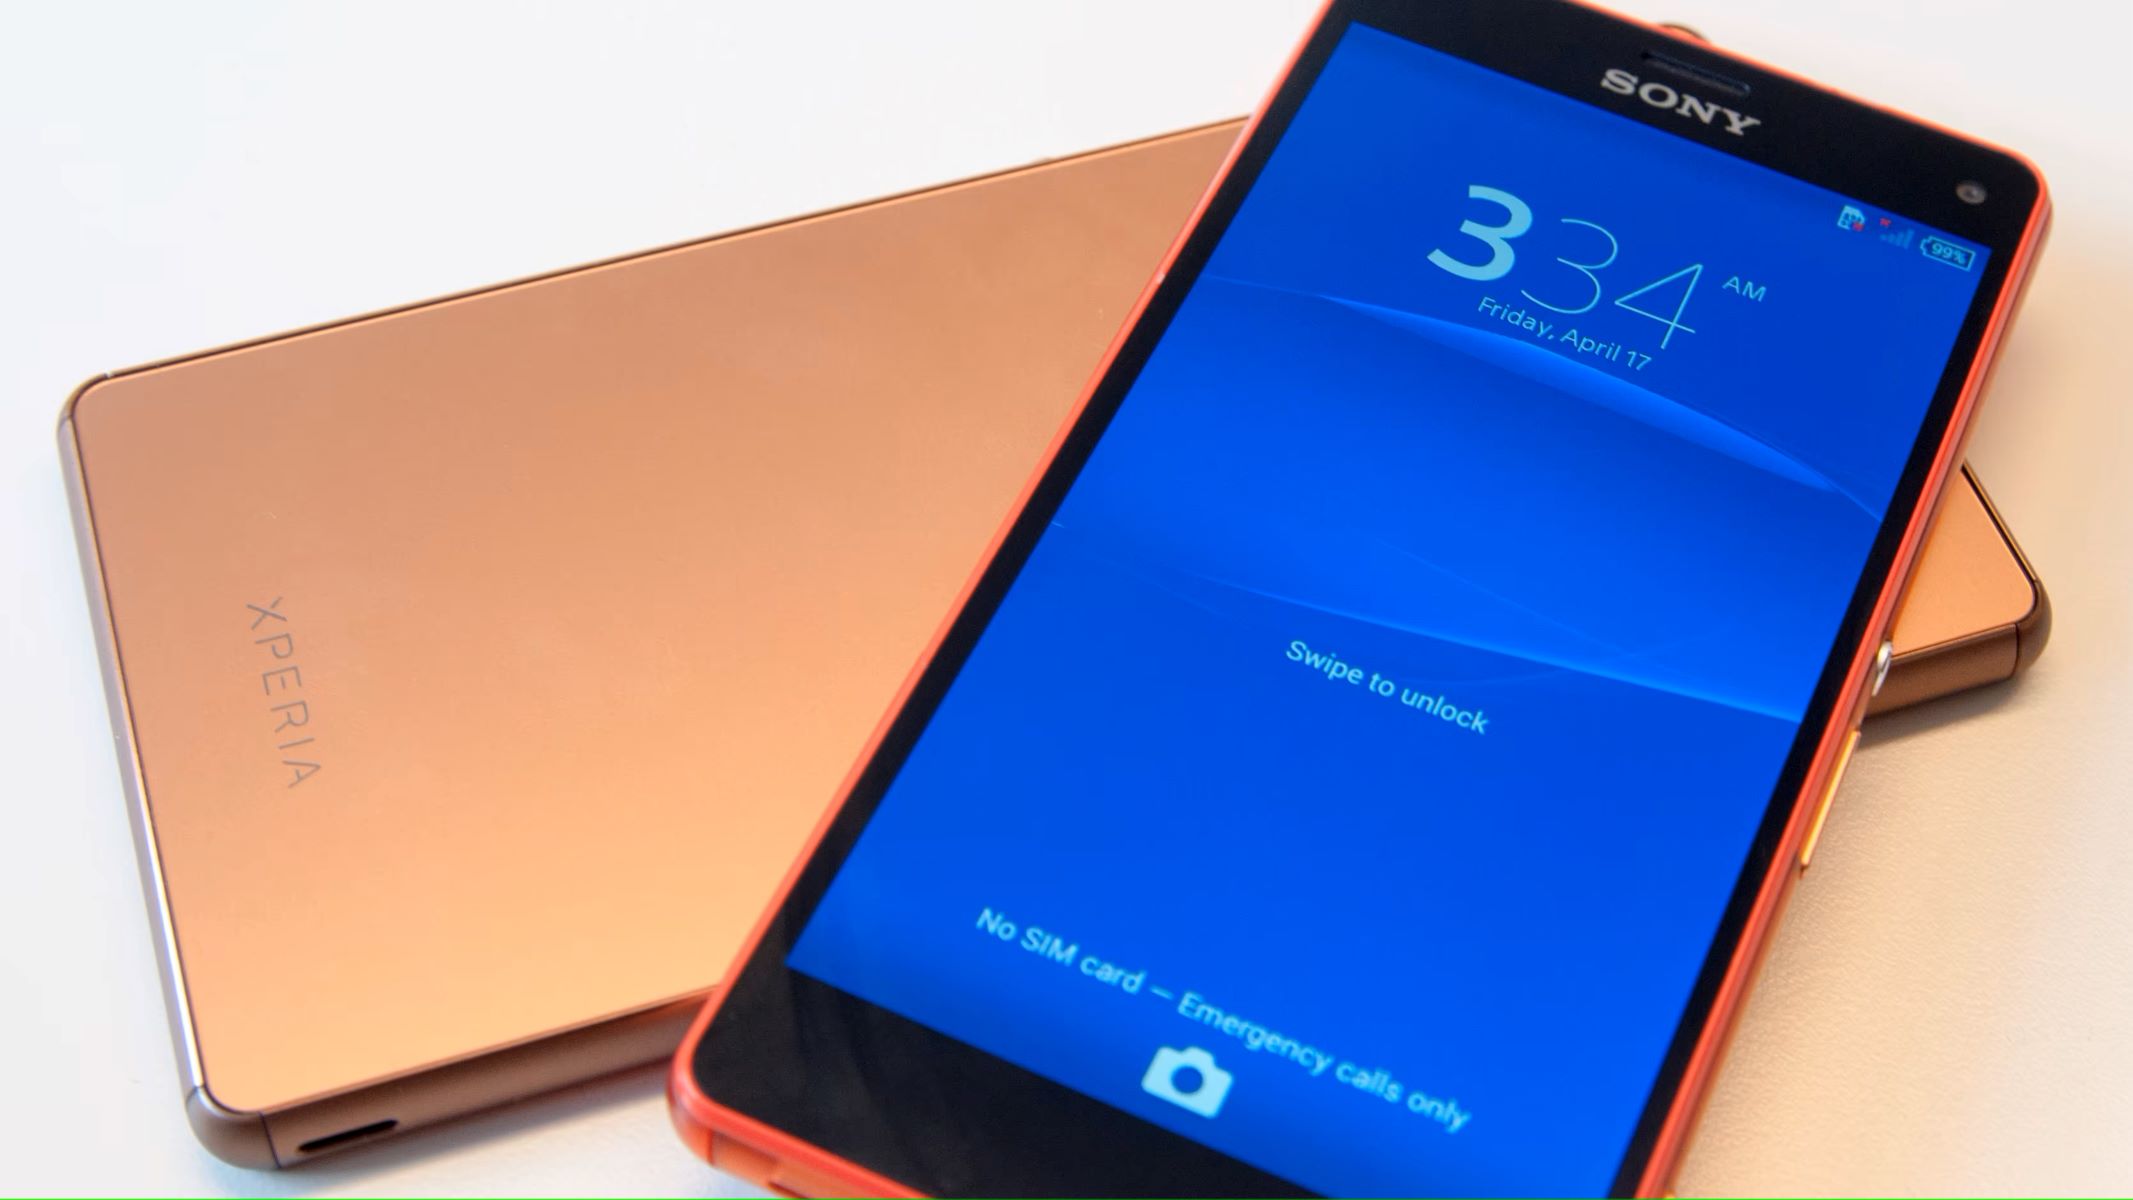 Upgrading Xperia Z3: How To Get The Marshmallow Update